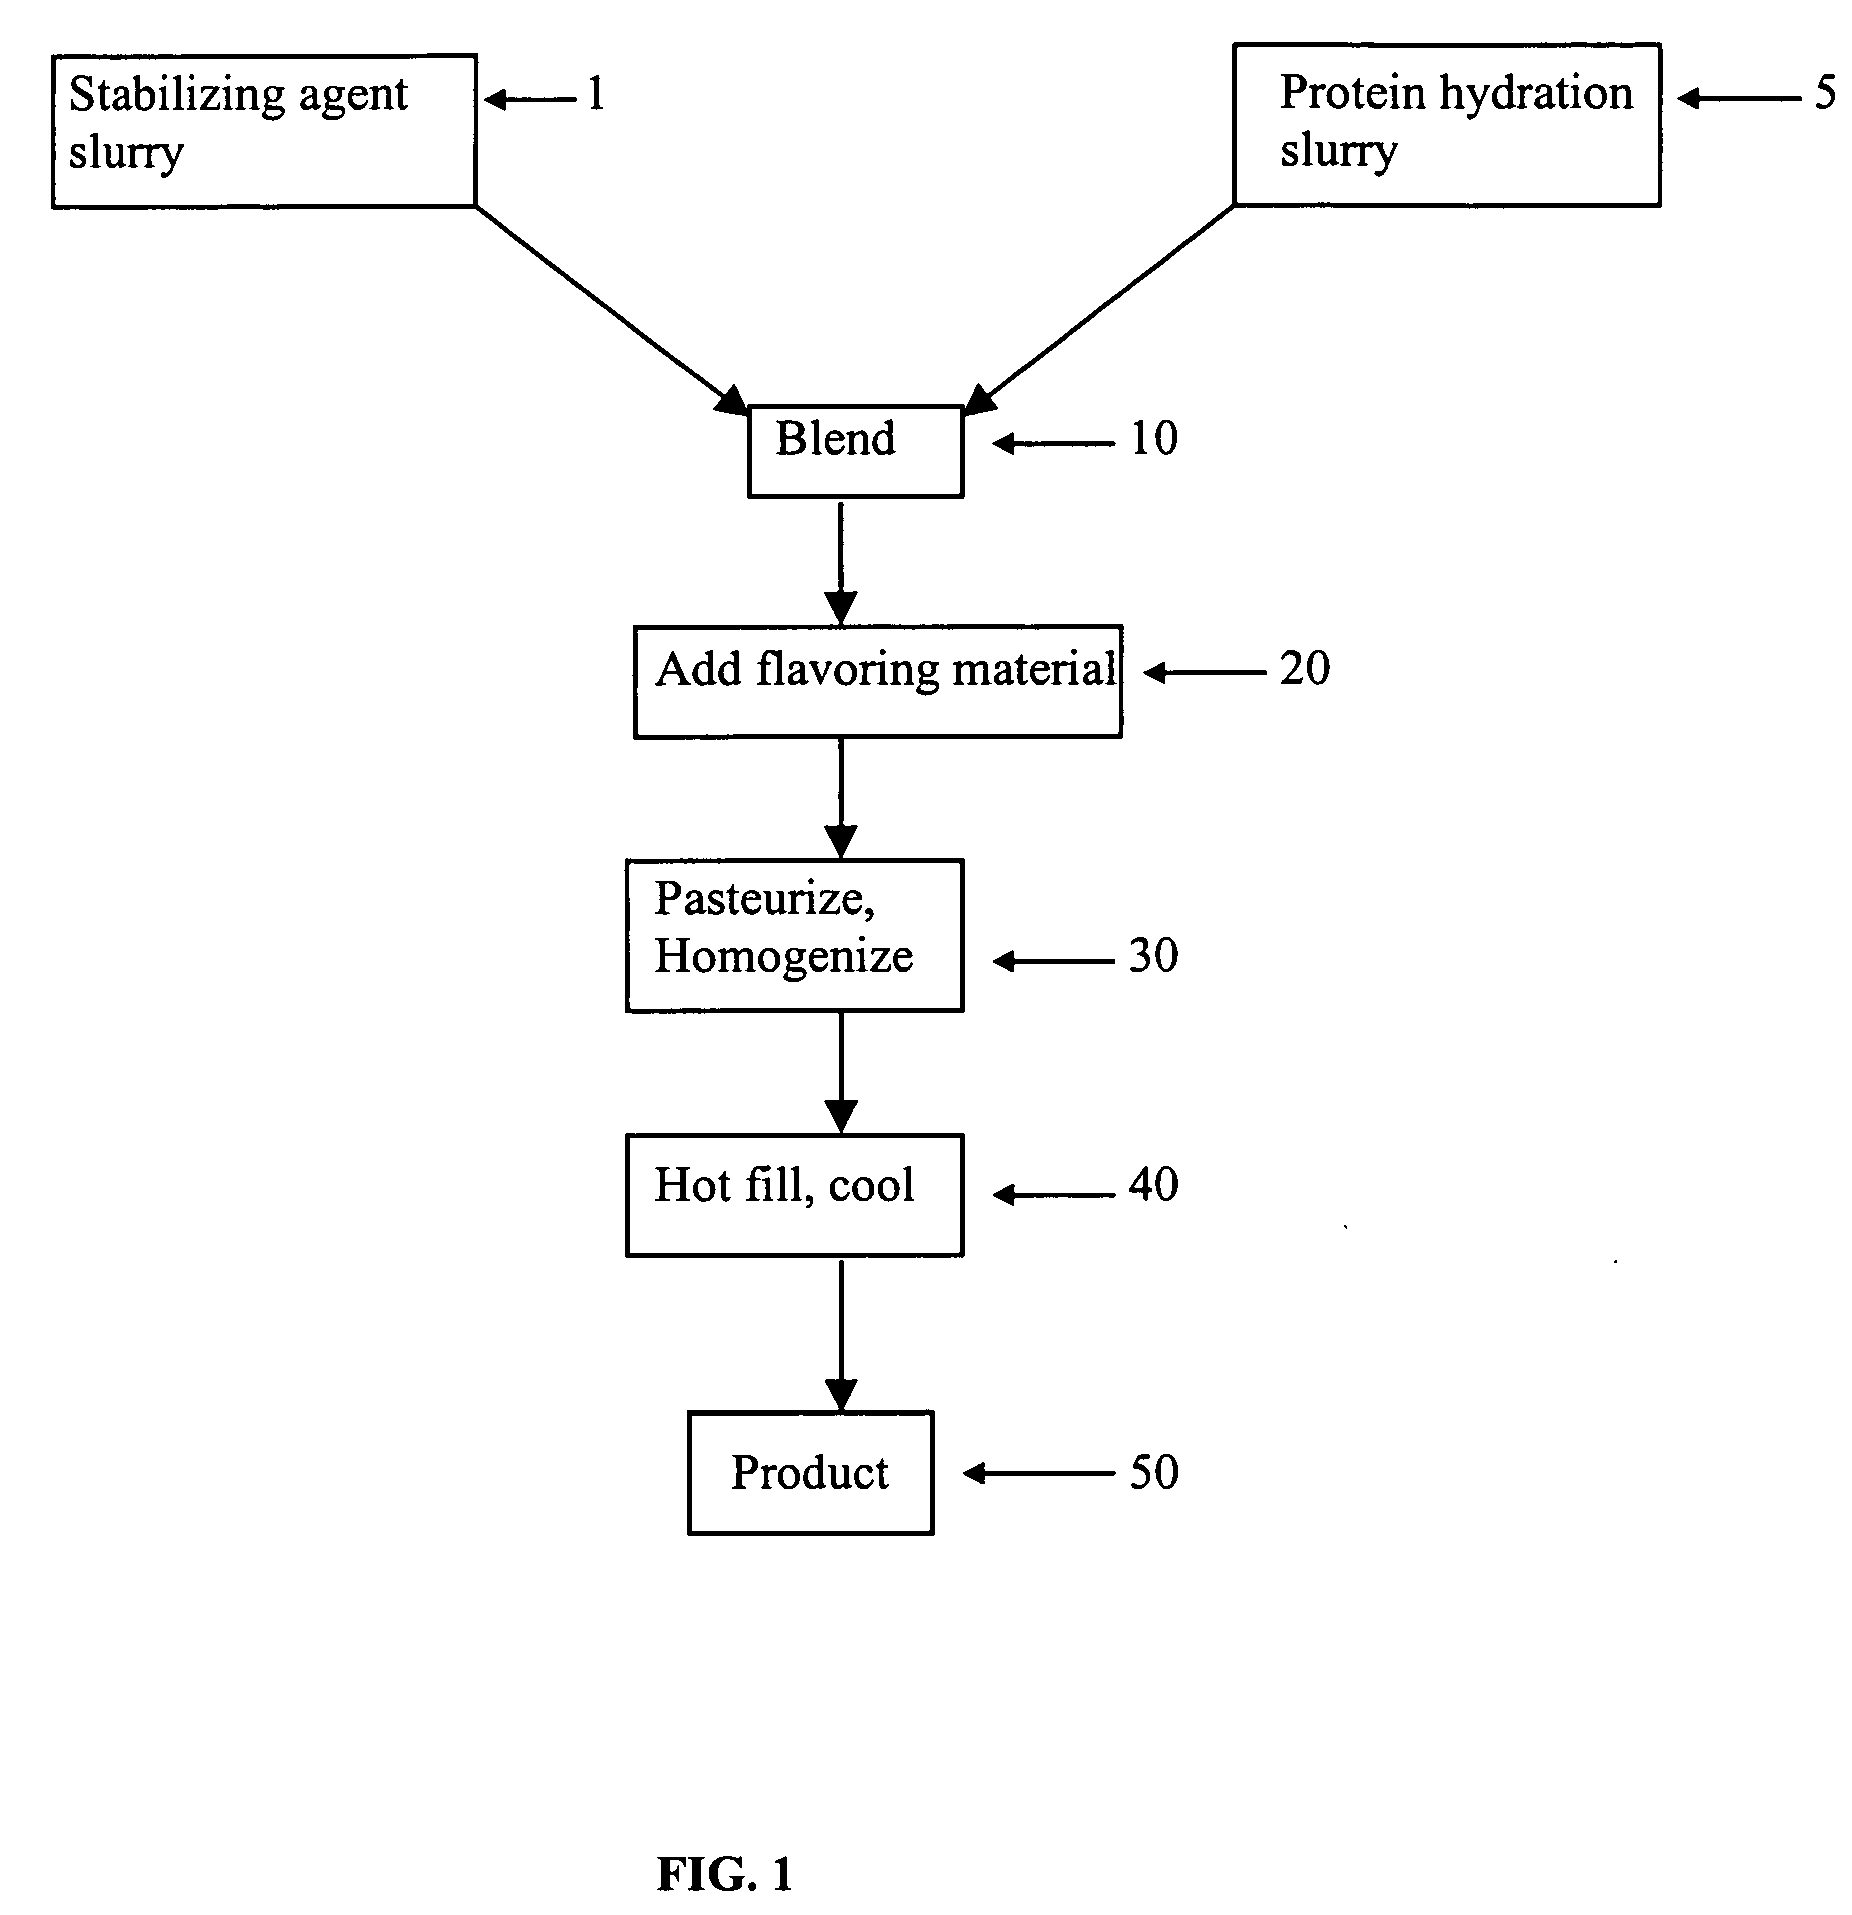 Acid beverage composition and process for making same utilizing an aqueous protein component